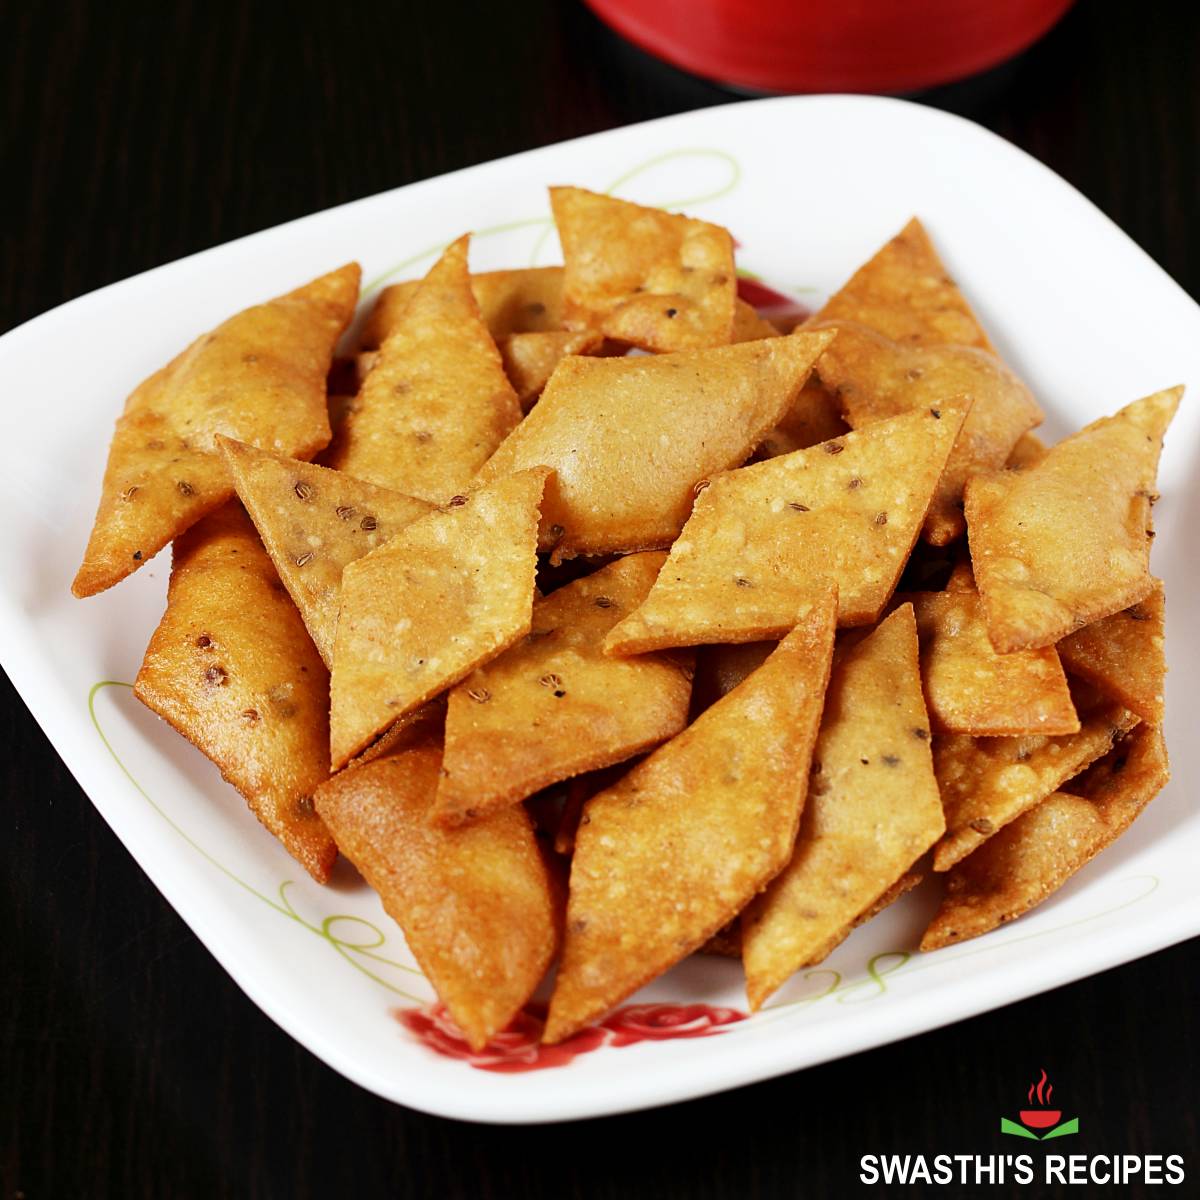 Namak para also known as spicy diamond cuts served in a plate